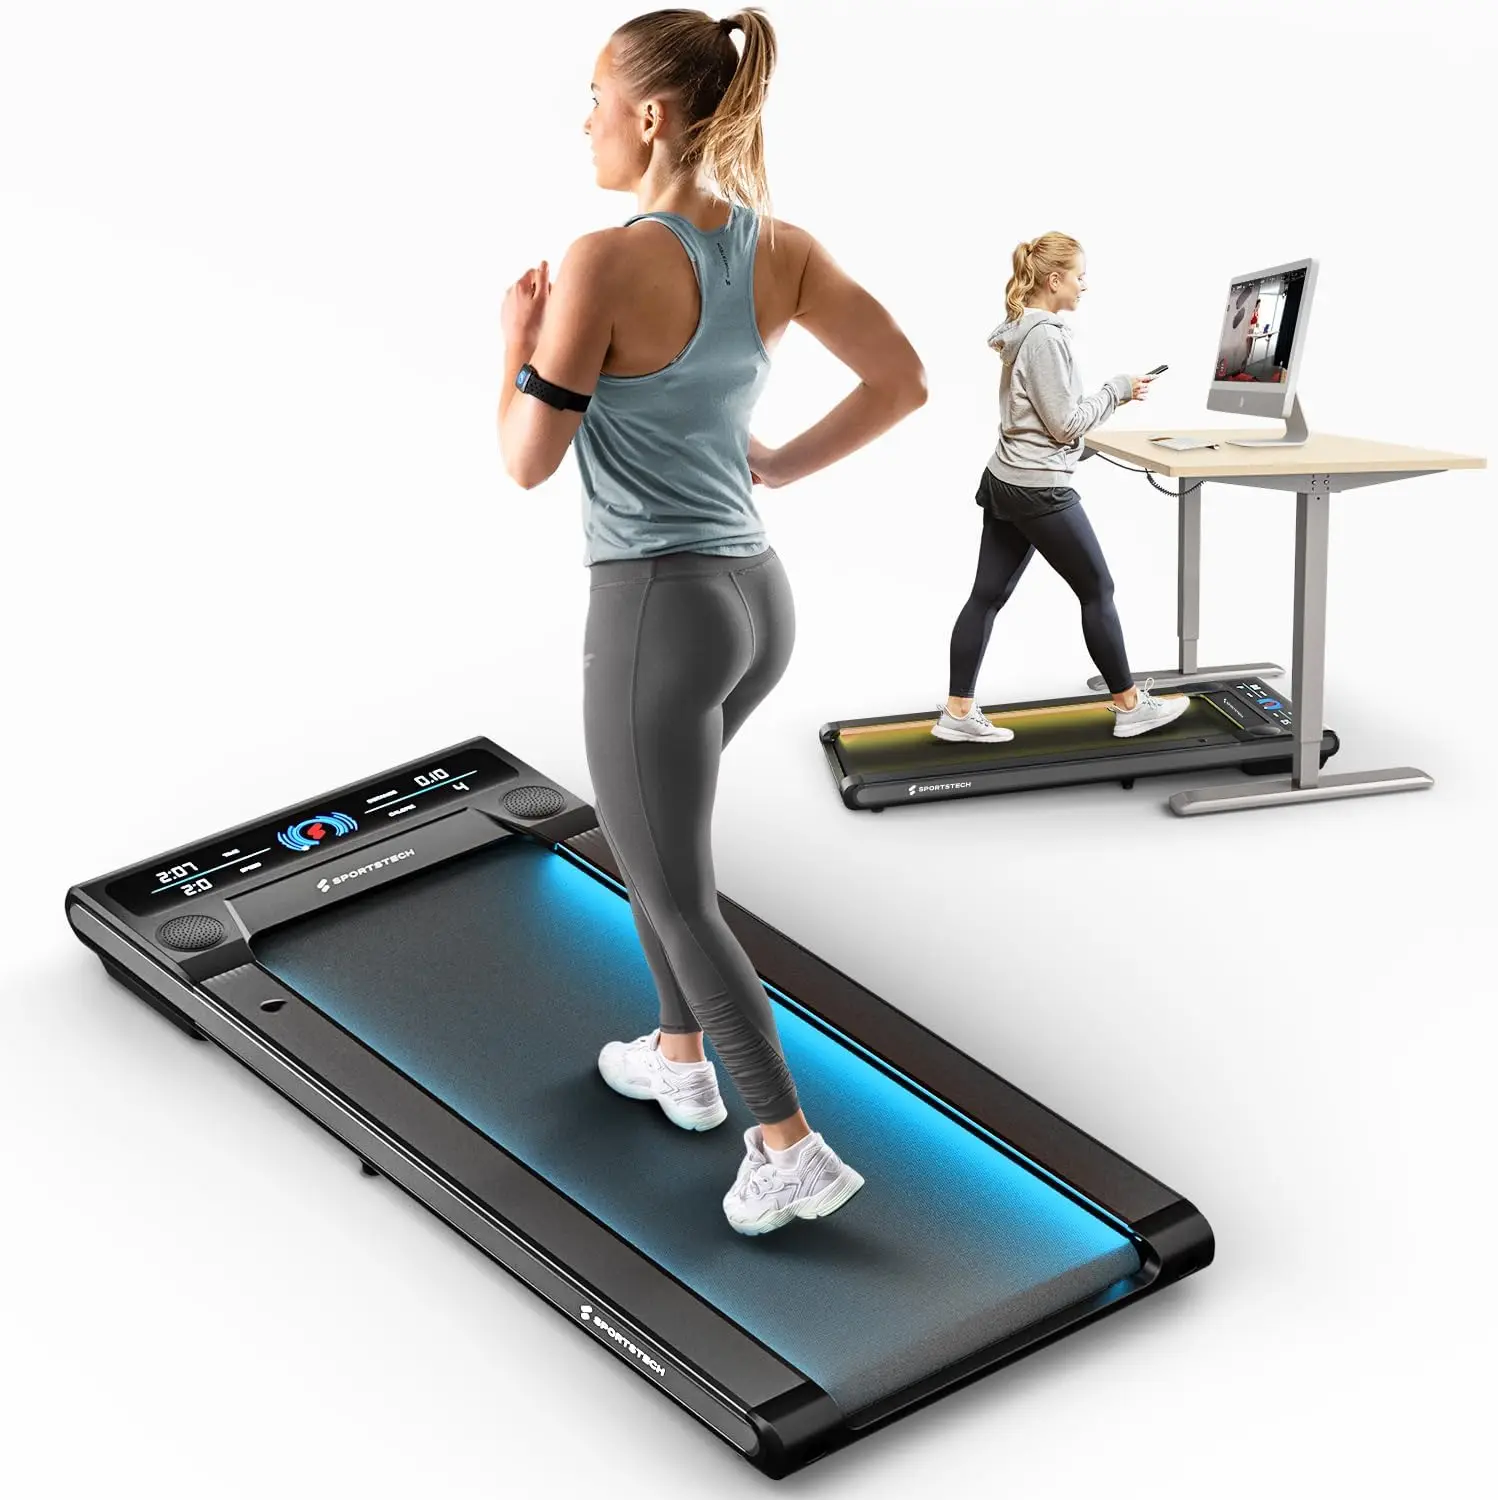 

Walking Pad Treadmill Under Desk for Home Office | Quiet Portable 300lbs Treadmills with Remote Control + App | Premi